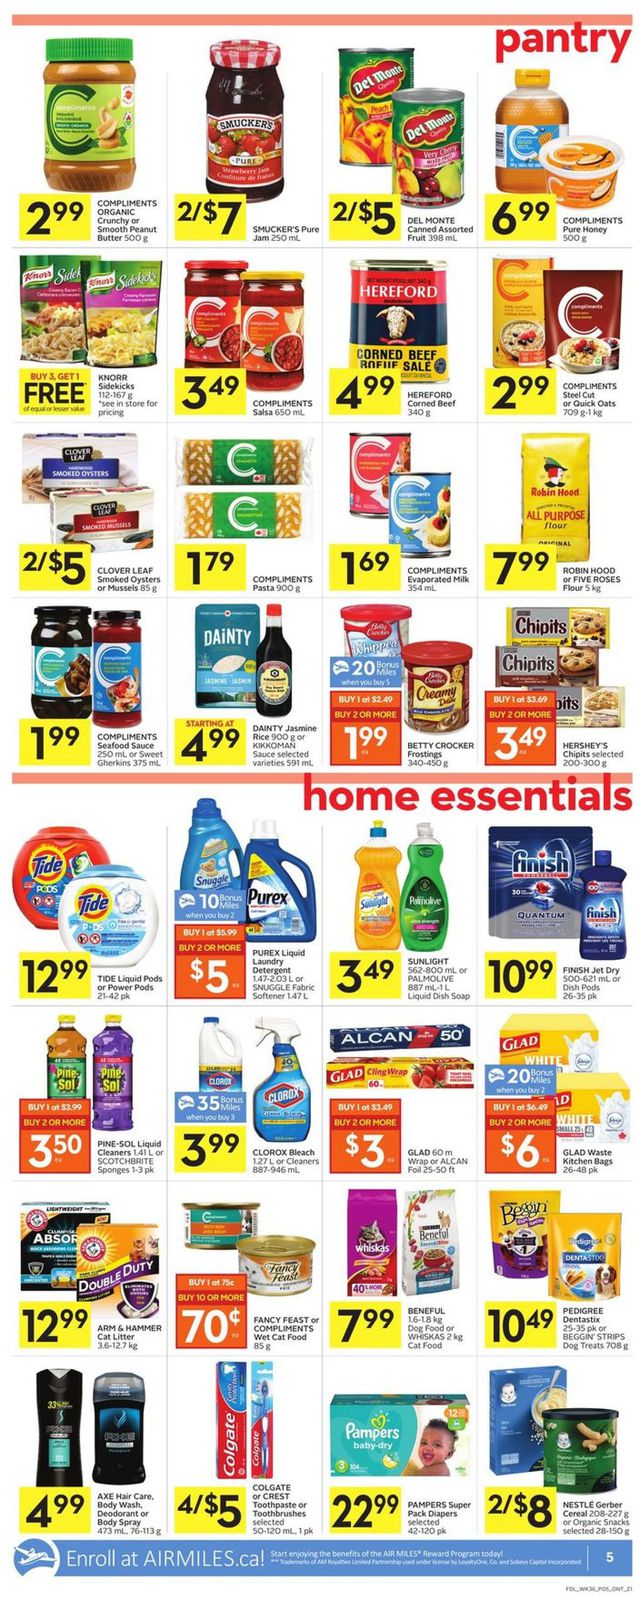 Foodland Flyer from 12/30/2021